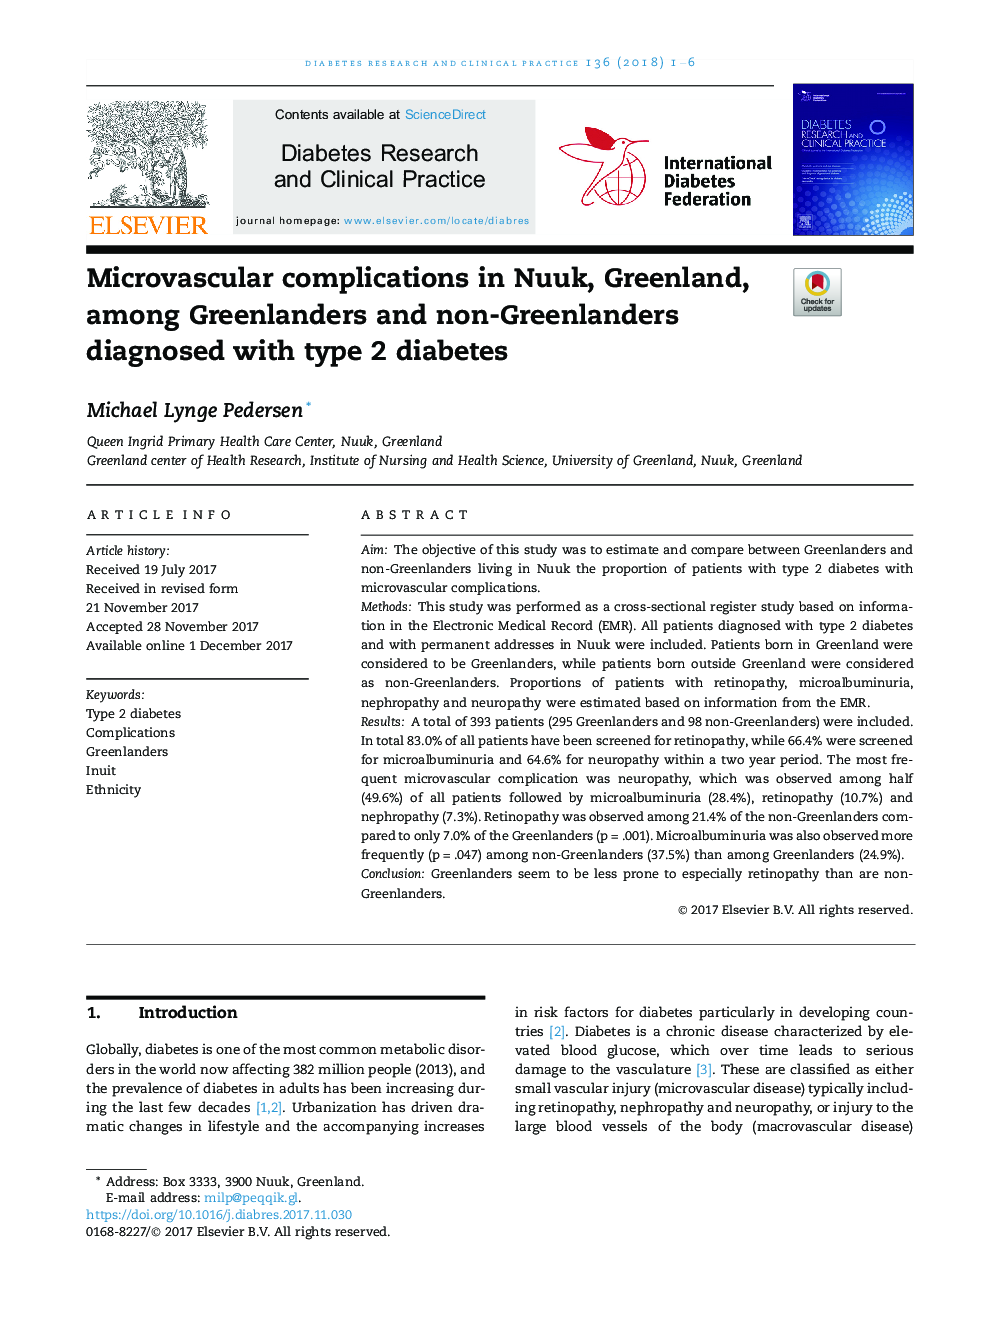 Microvascular complications in Nuuk, Greenland, among Greenlanders and non-Greenlanders diagnosed with type 2 diabetes